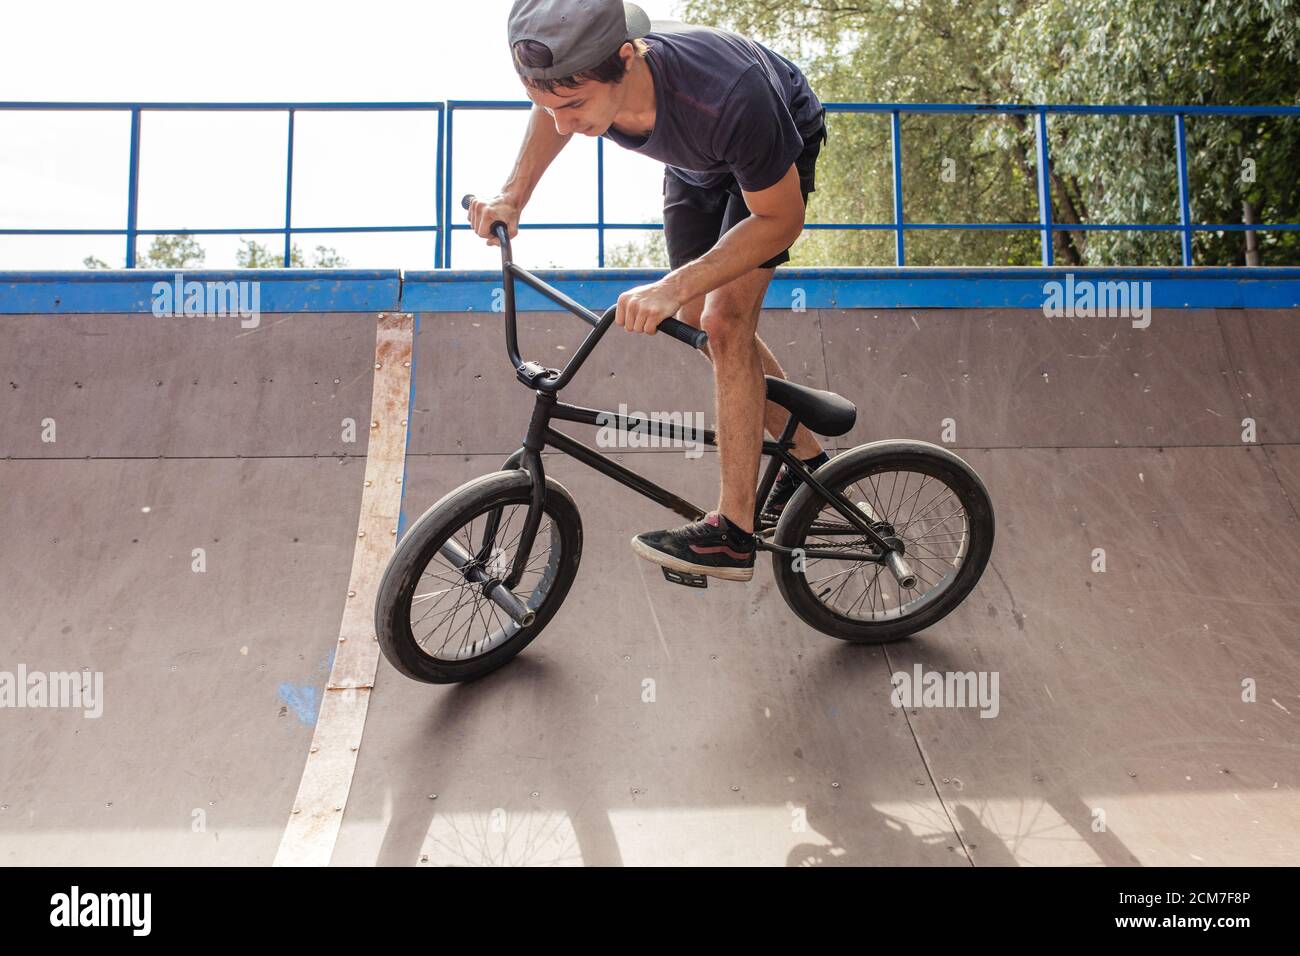 BMX biker in skate Park in open air, people skills with special bike Stock  Photo - Alamy